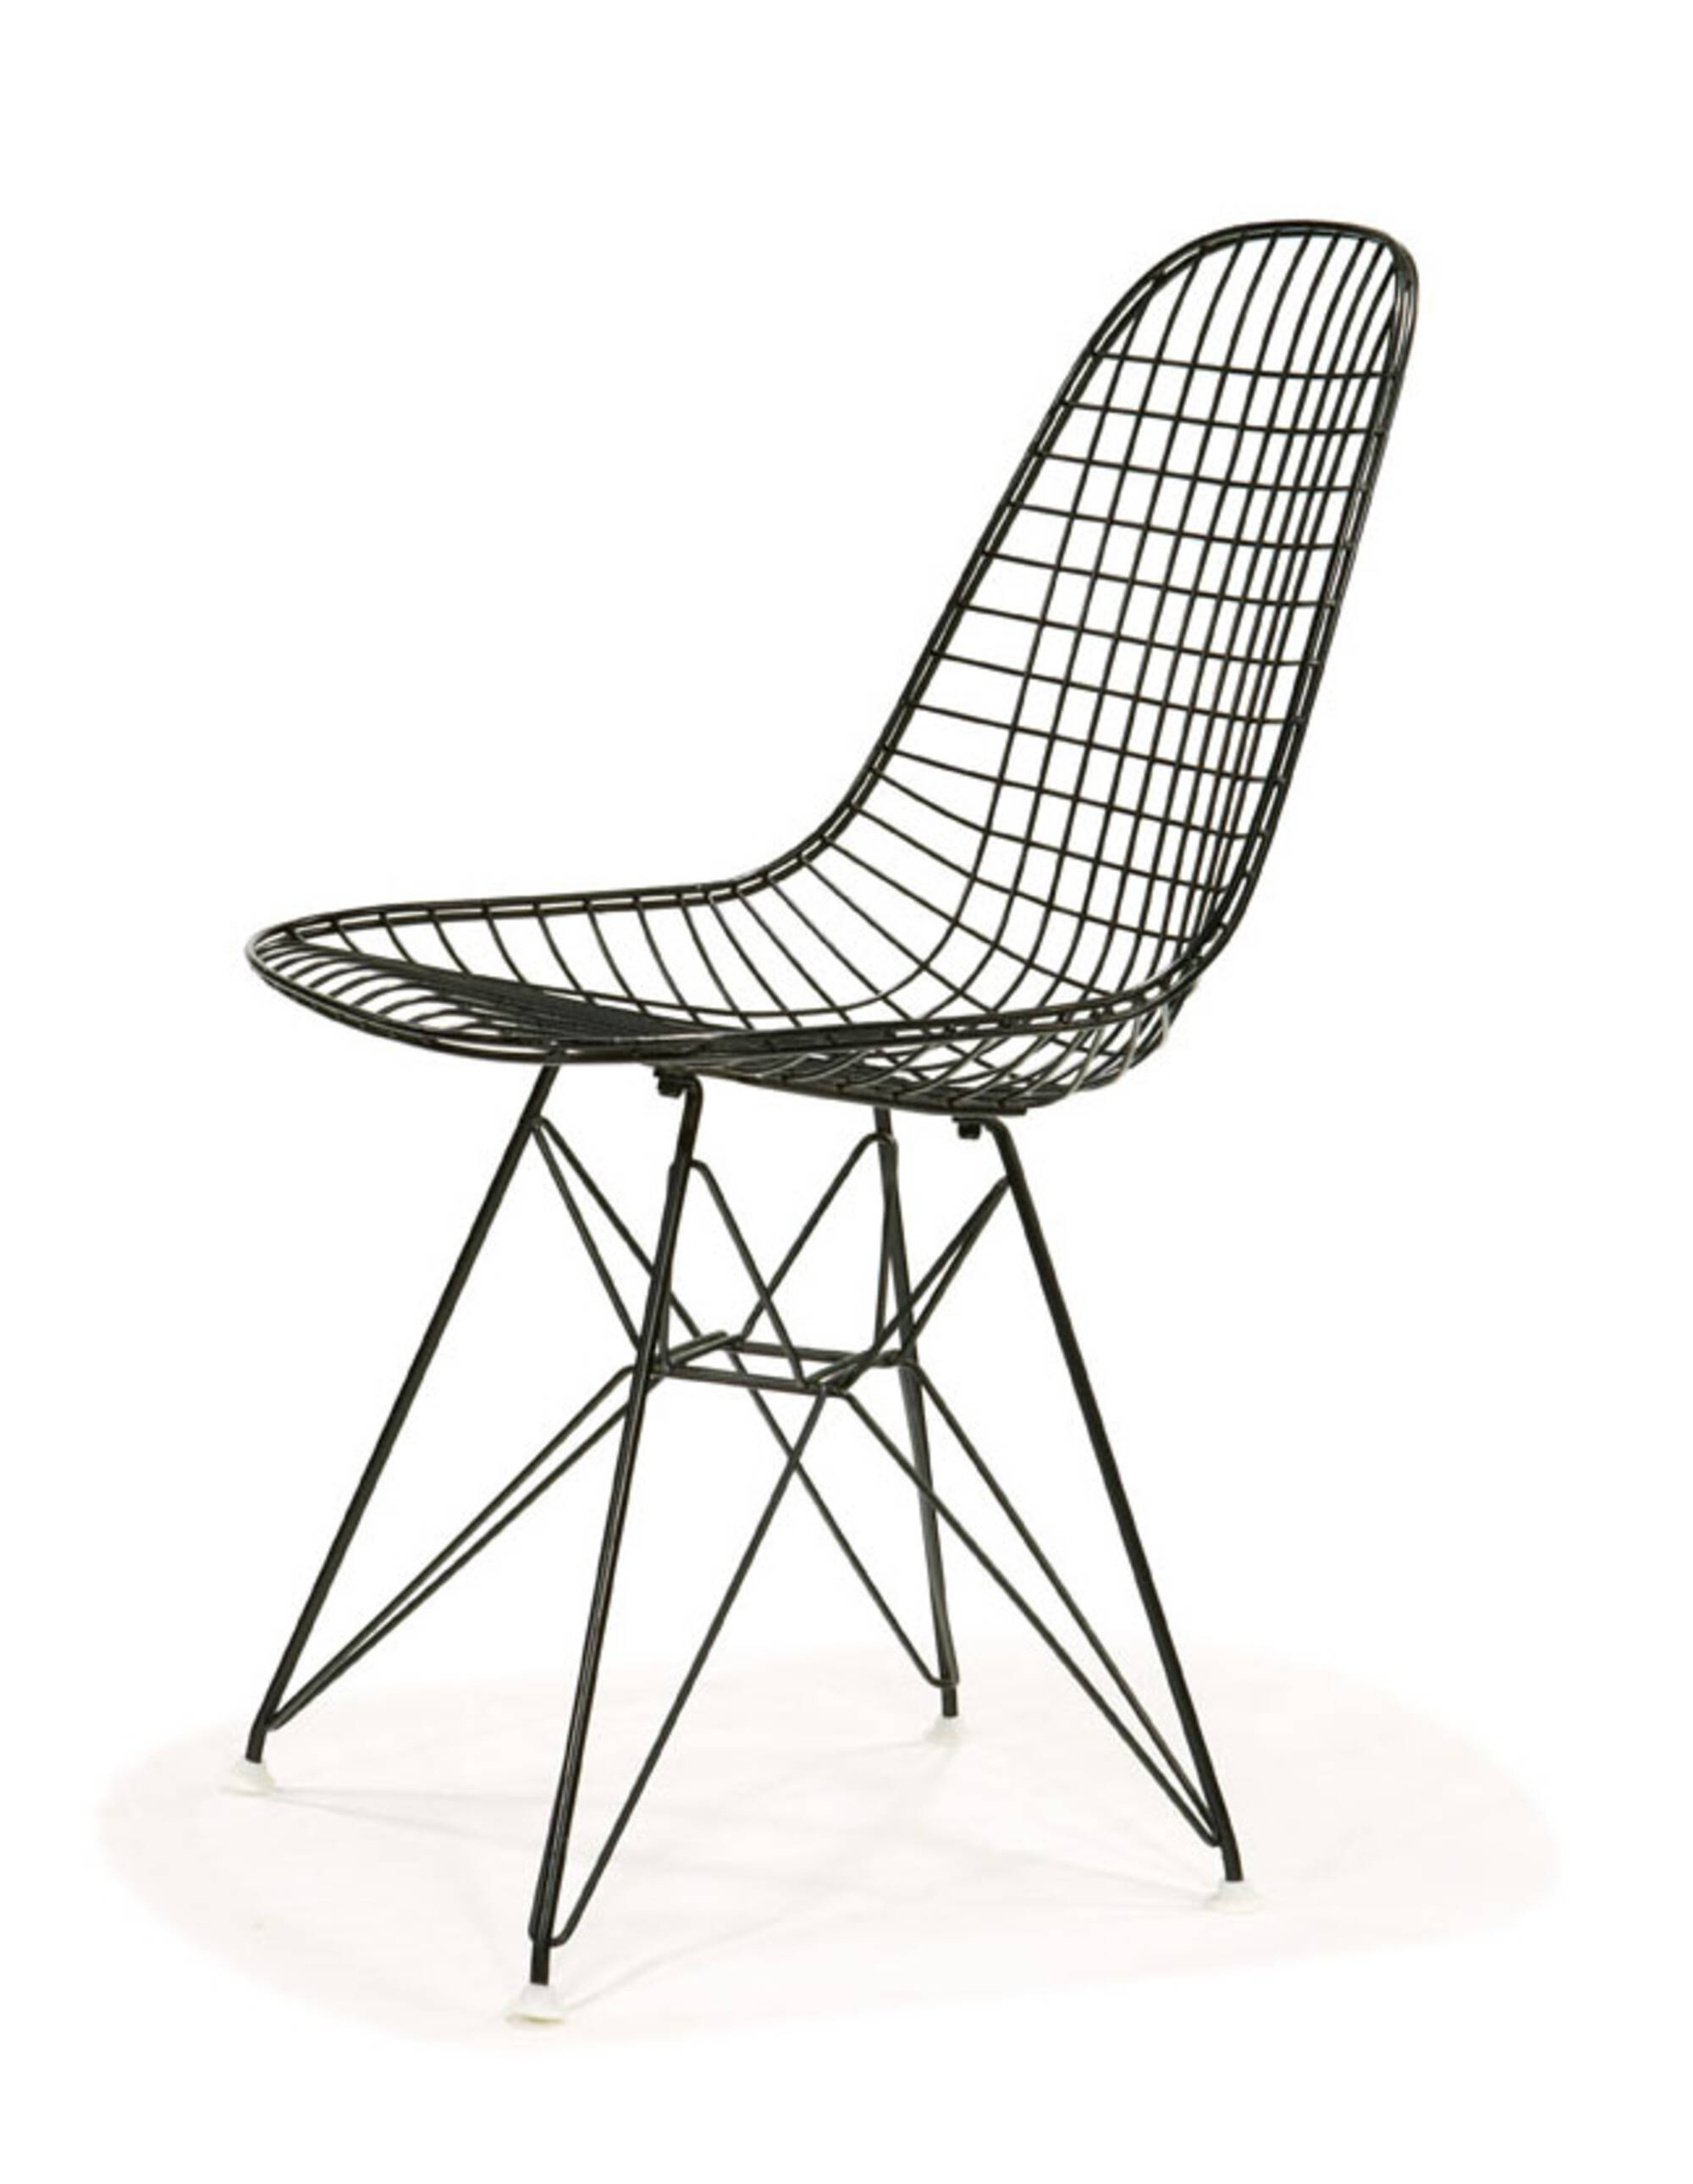 361: CHARLES AND RAY EAMES, Wire Mesh Chair (or Eiffel Tower 